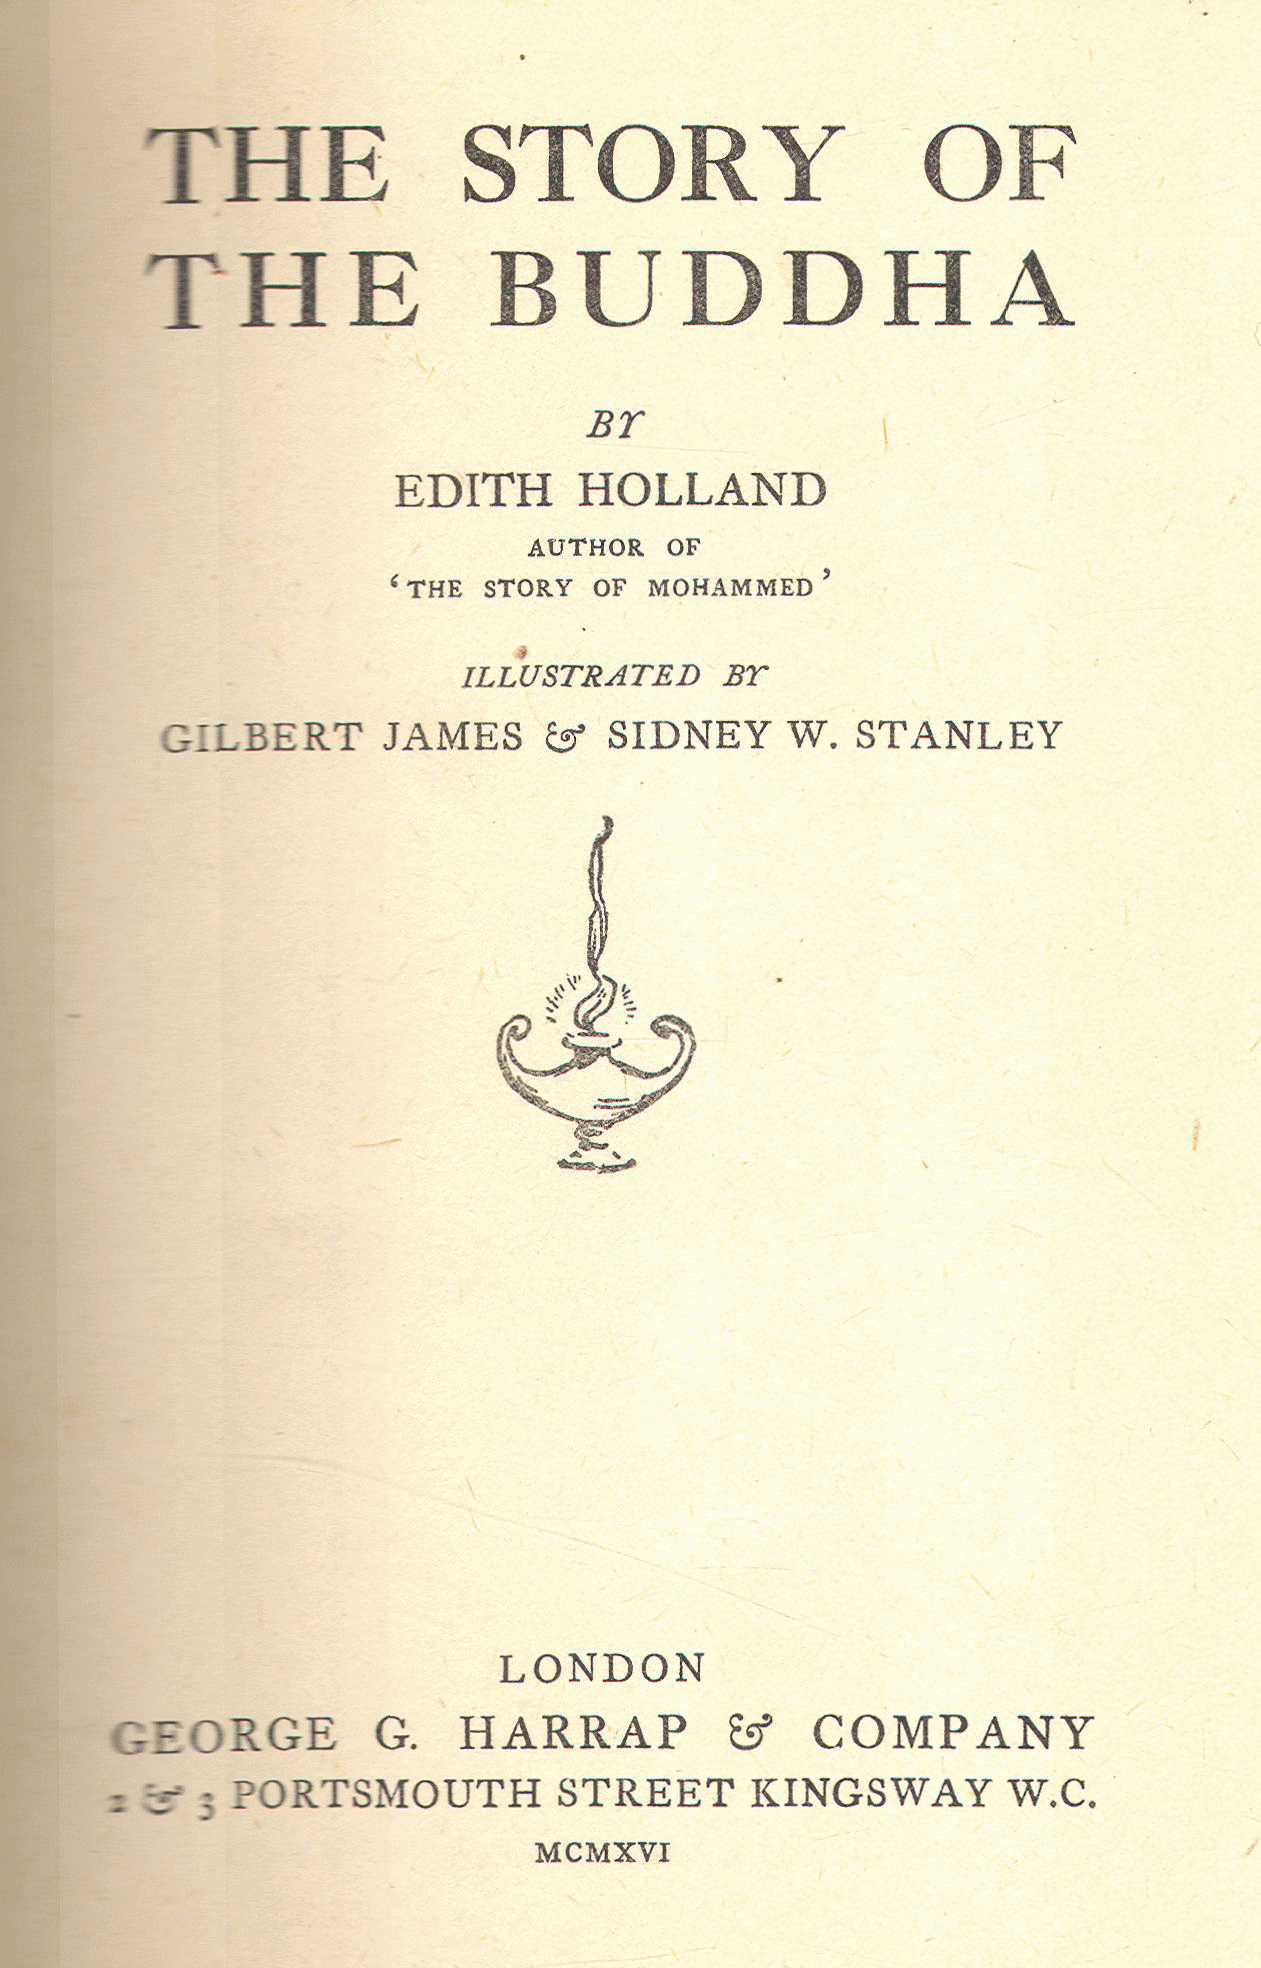 [Title Page] from The Story of the Buddha by Edith Holland